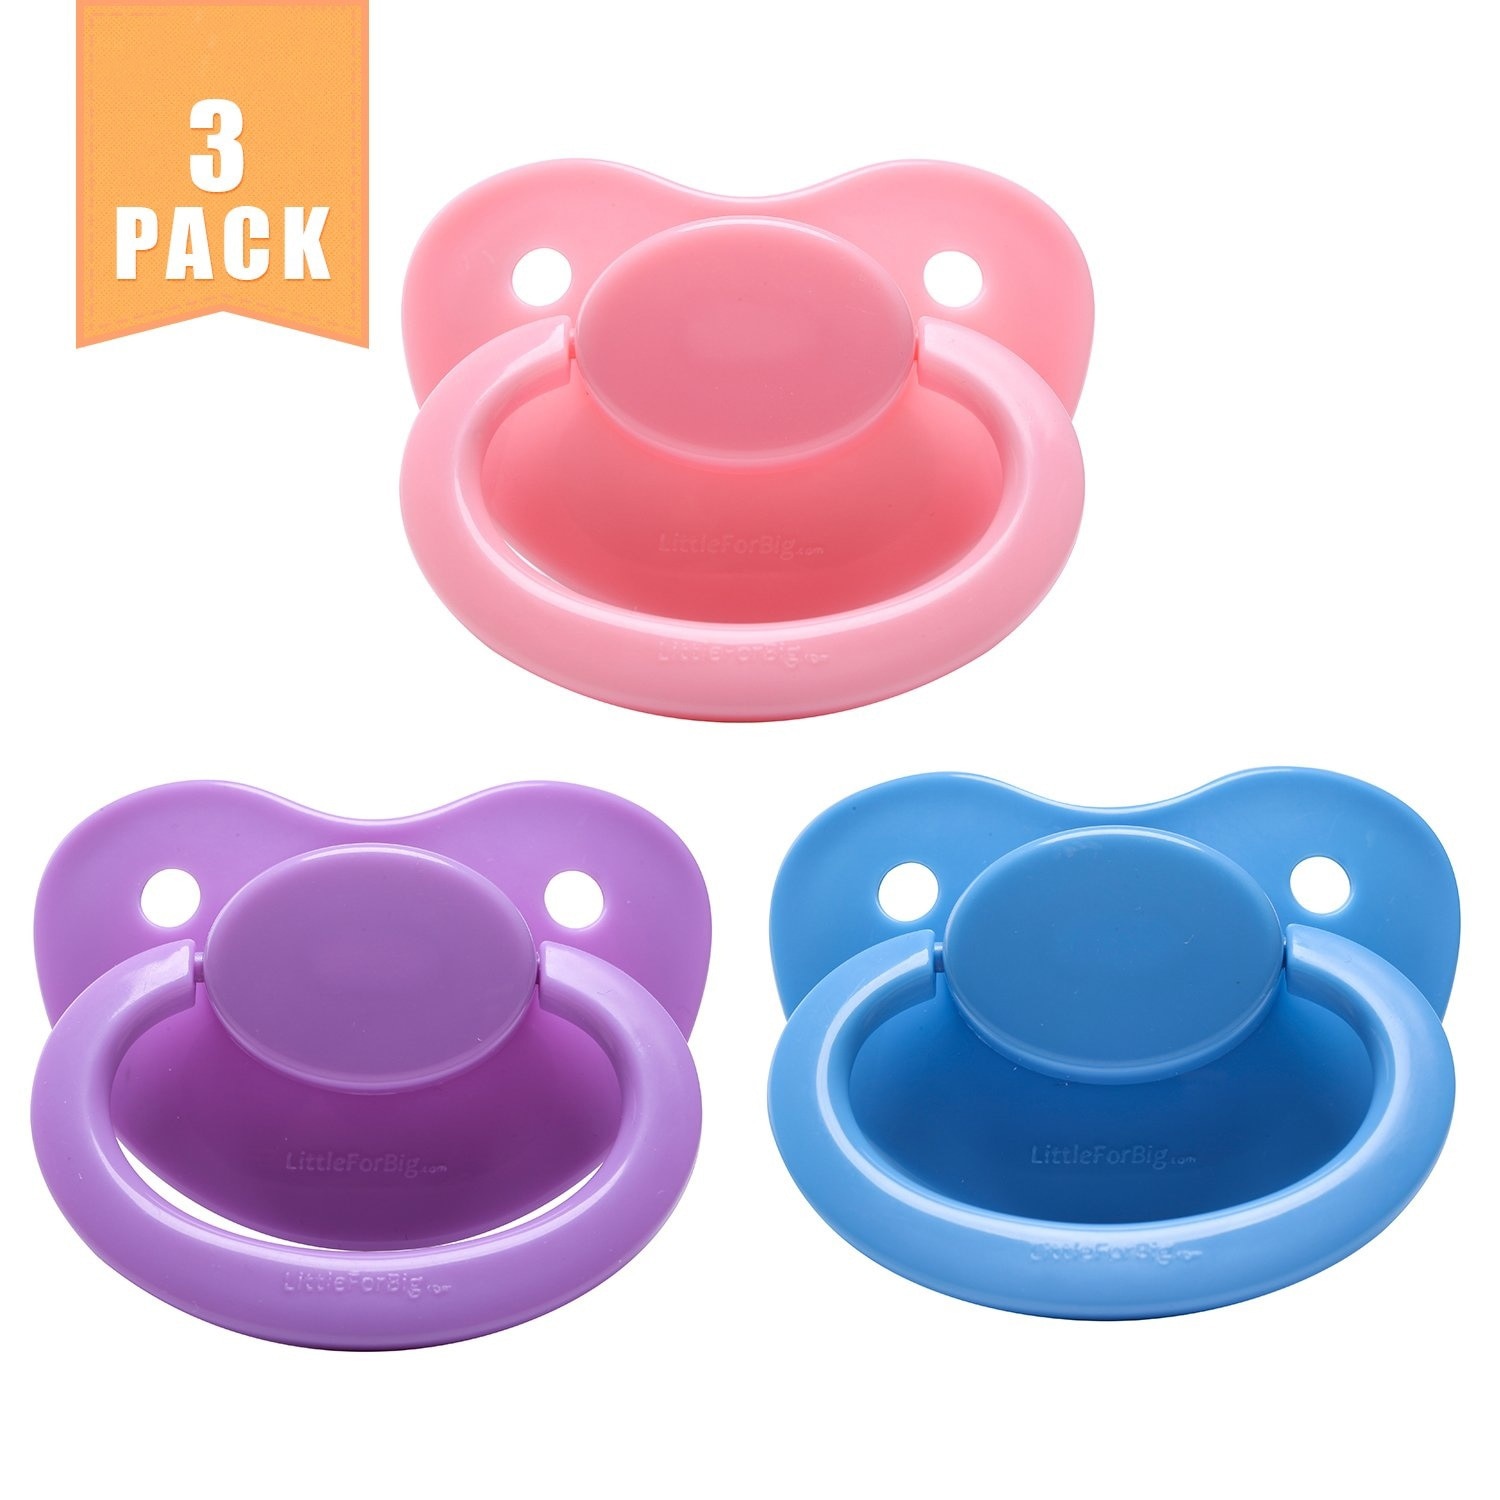 Ddlg Adult Sized Pacifier Dummy For Adult Baby Abdl Bigshield Three Pacifier In A Pack Grandado